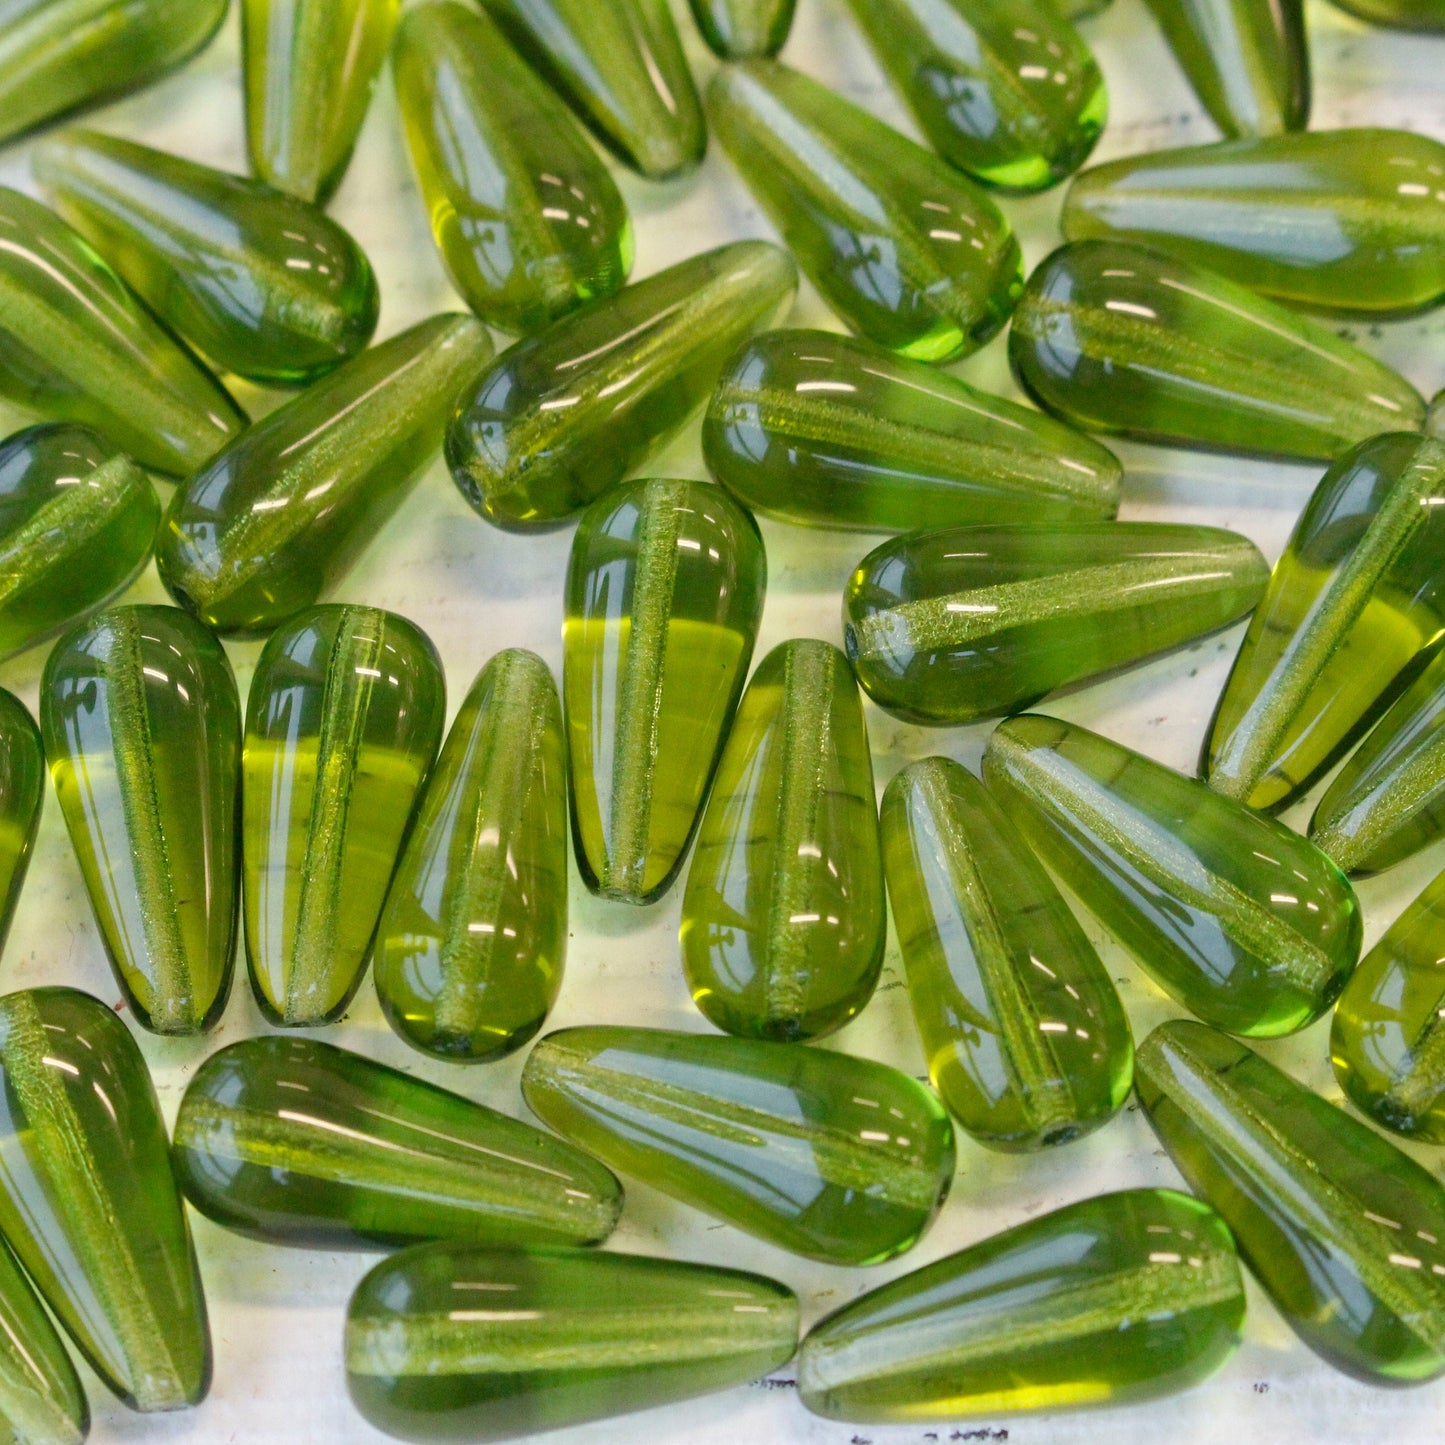 9x20mm Long Drilled Drops - Lime Green - 20 Beads